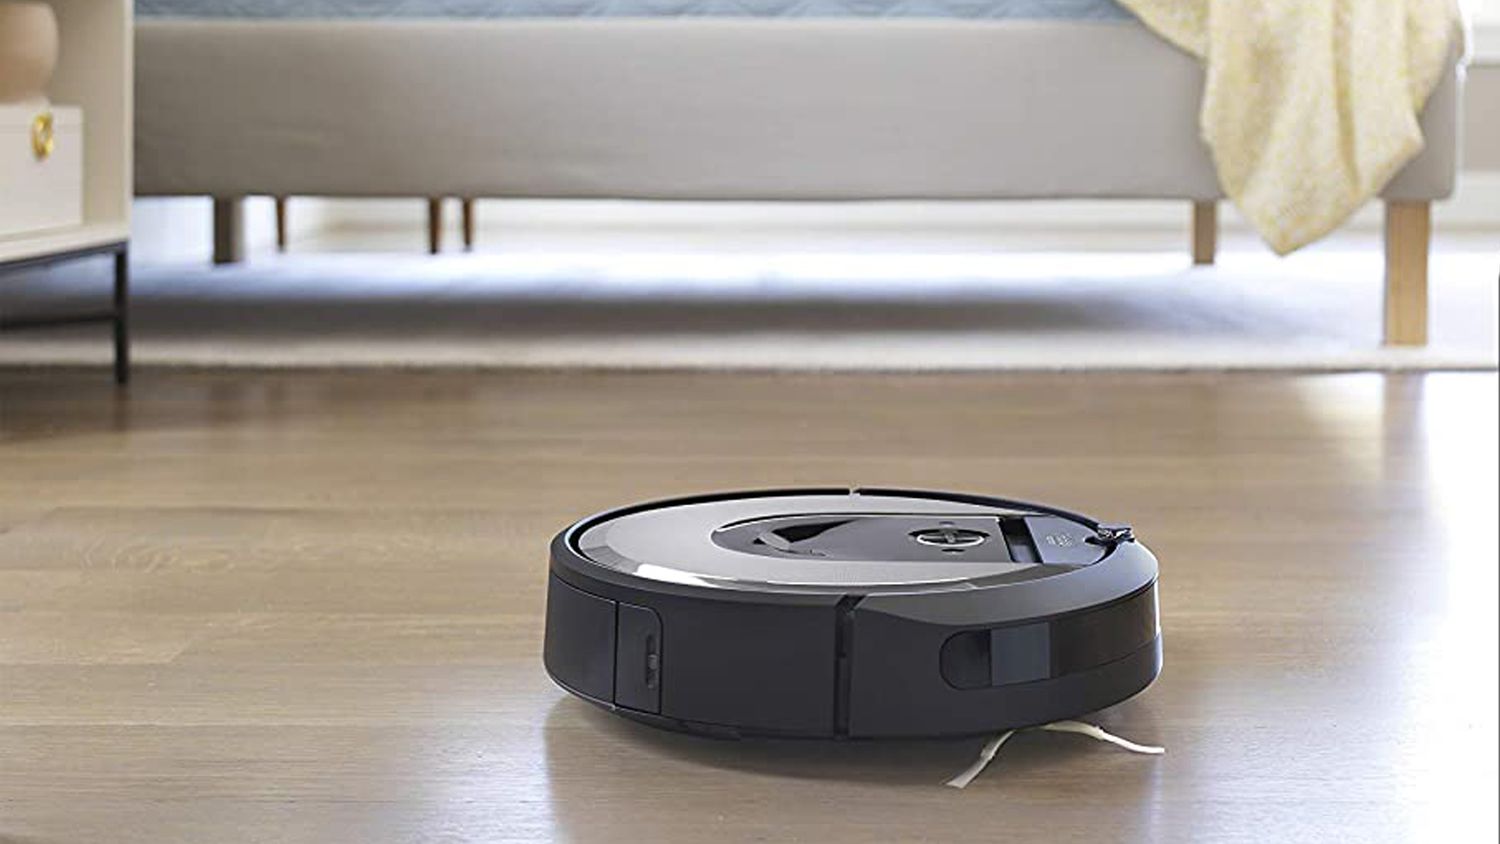 Best Robot Vacuums For Hardwood Floors, What Is The Best Vacuum Cleaner For Hardwood Floors